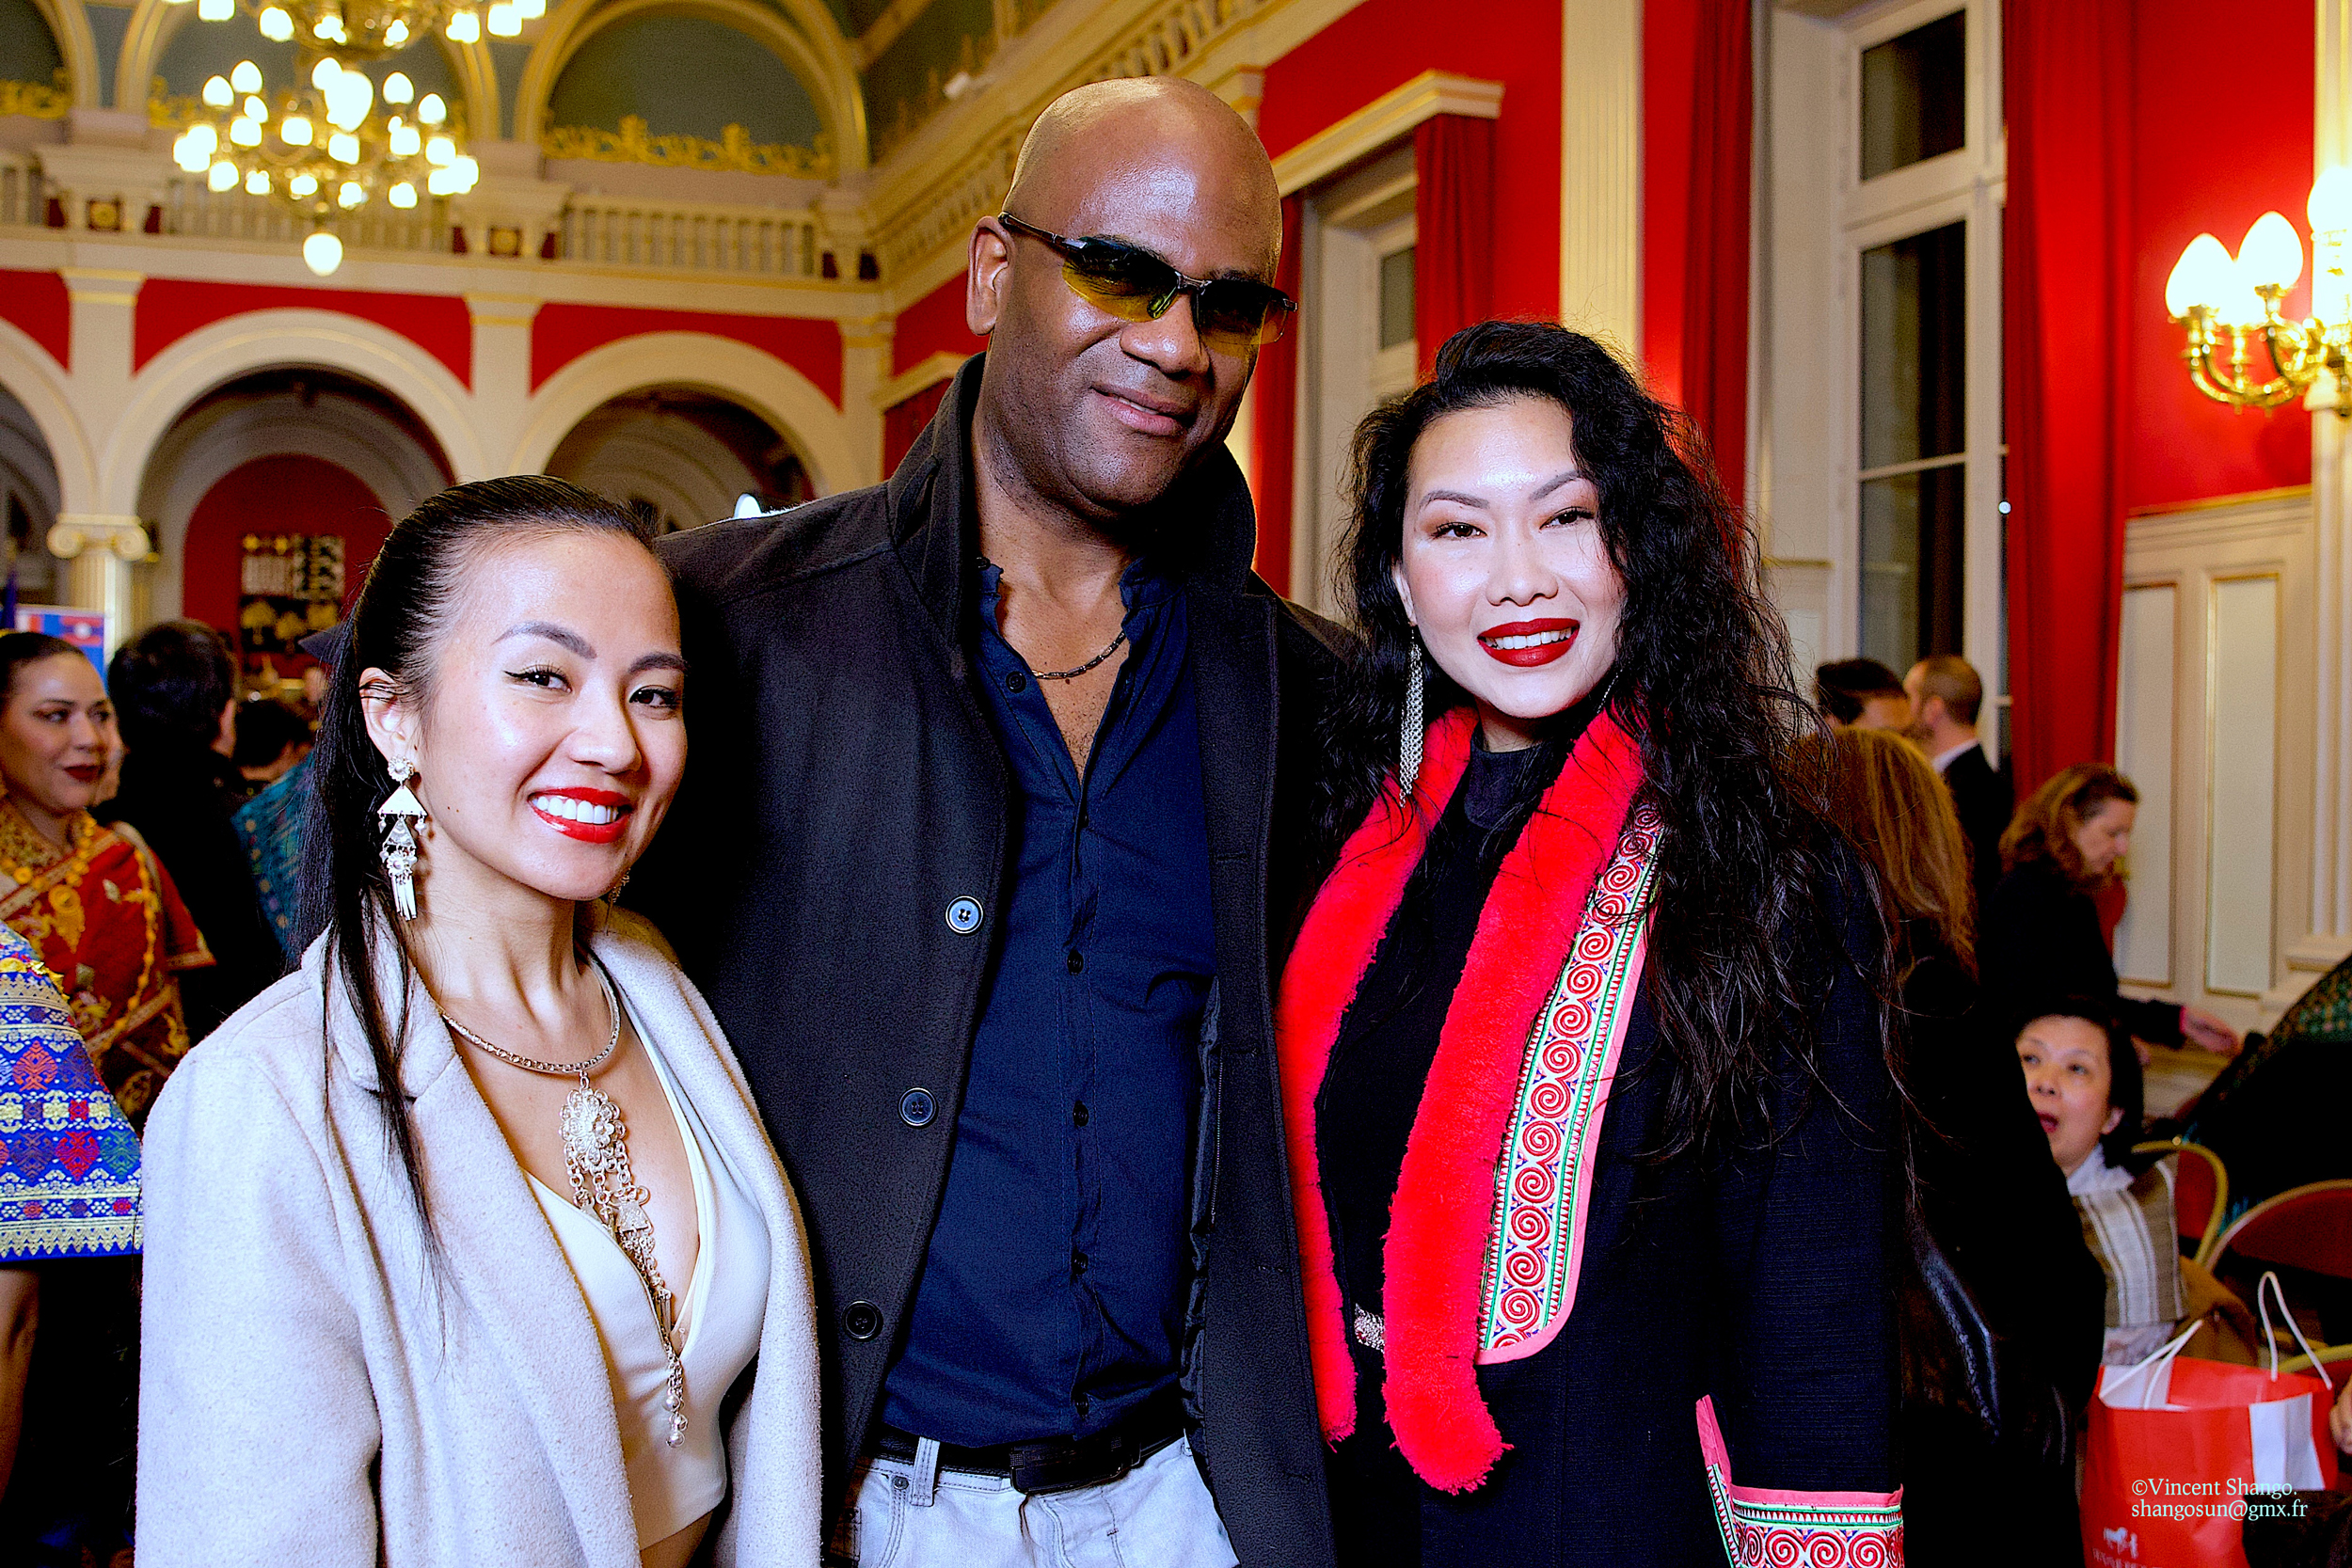 LAO-Fashion-Week.-2023-Lao-Fashion-Festival-in-Paris -Special Guest Thierry JOLY -  Photographe Vincent SHANGO - Cameraman Charles JACKOTIN